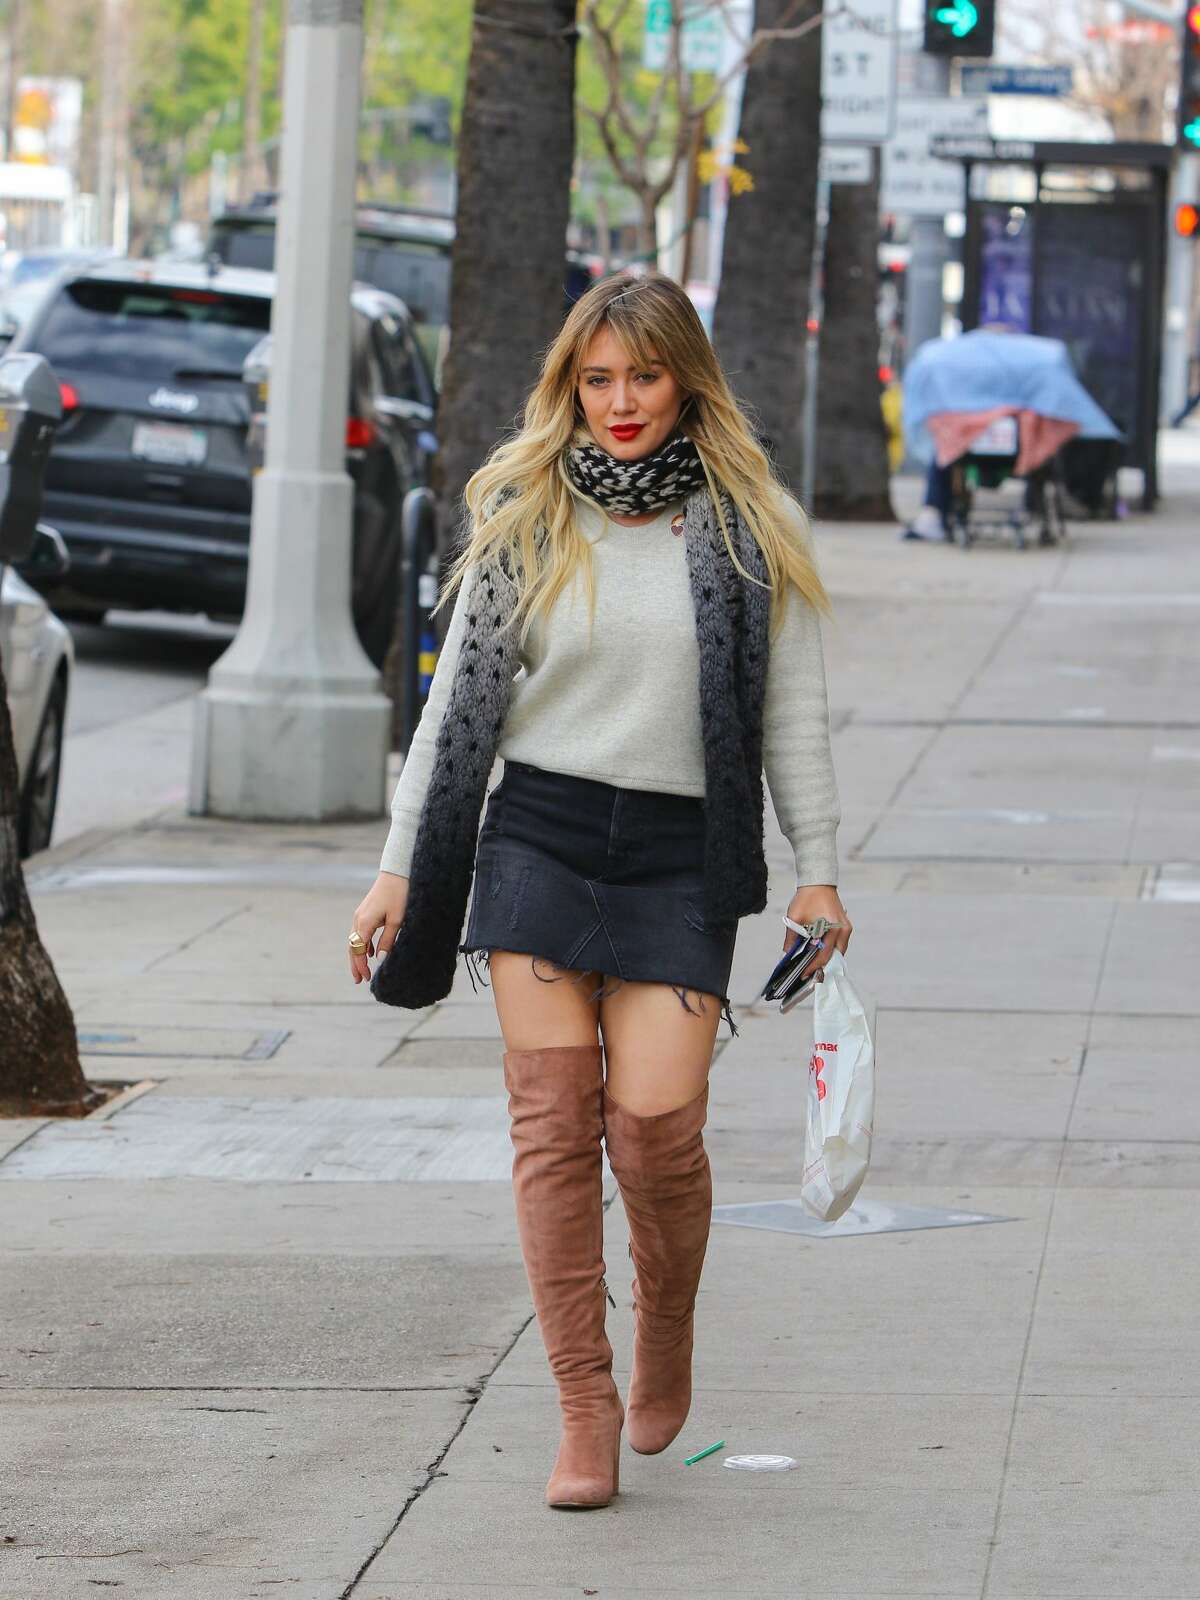 Hilary Duff is seen on January 09, 2017 in Los Angeles, California. Keep clicking to see more celebrities in mini skirts. 